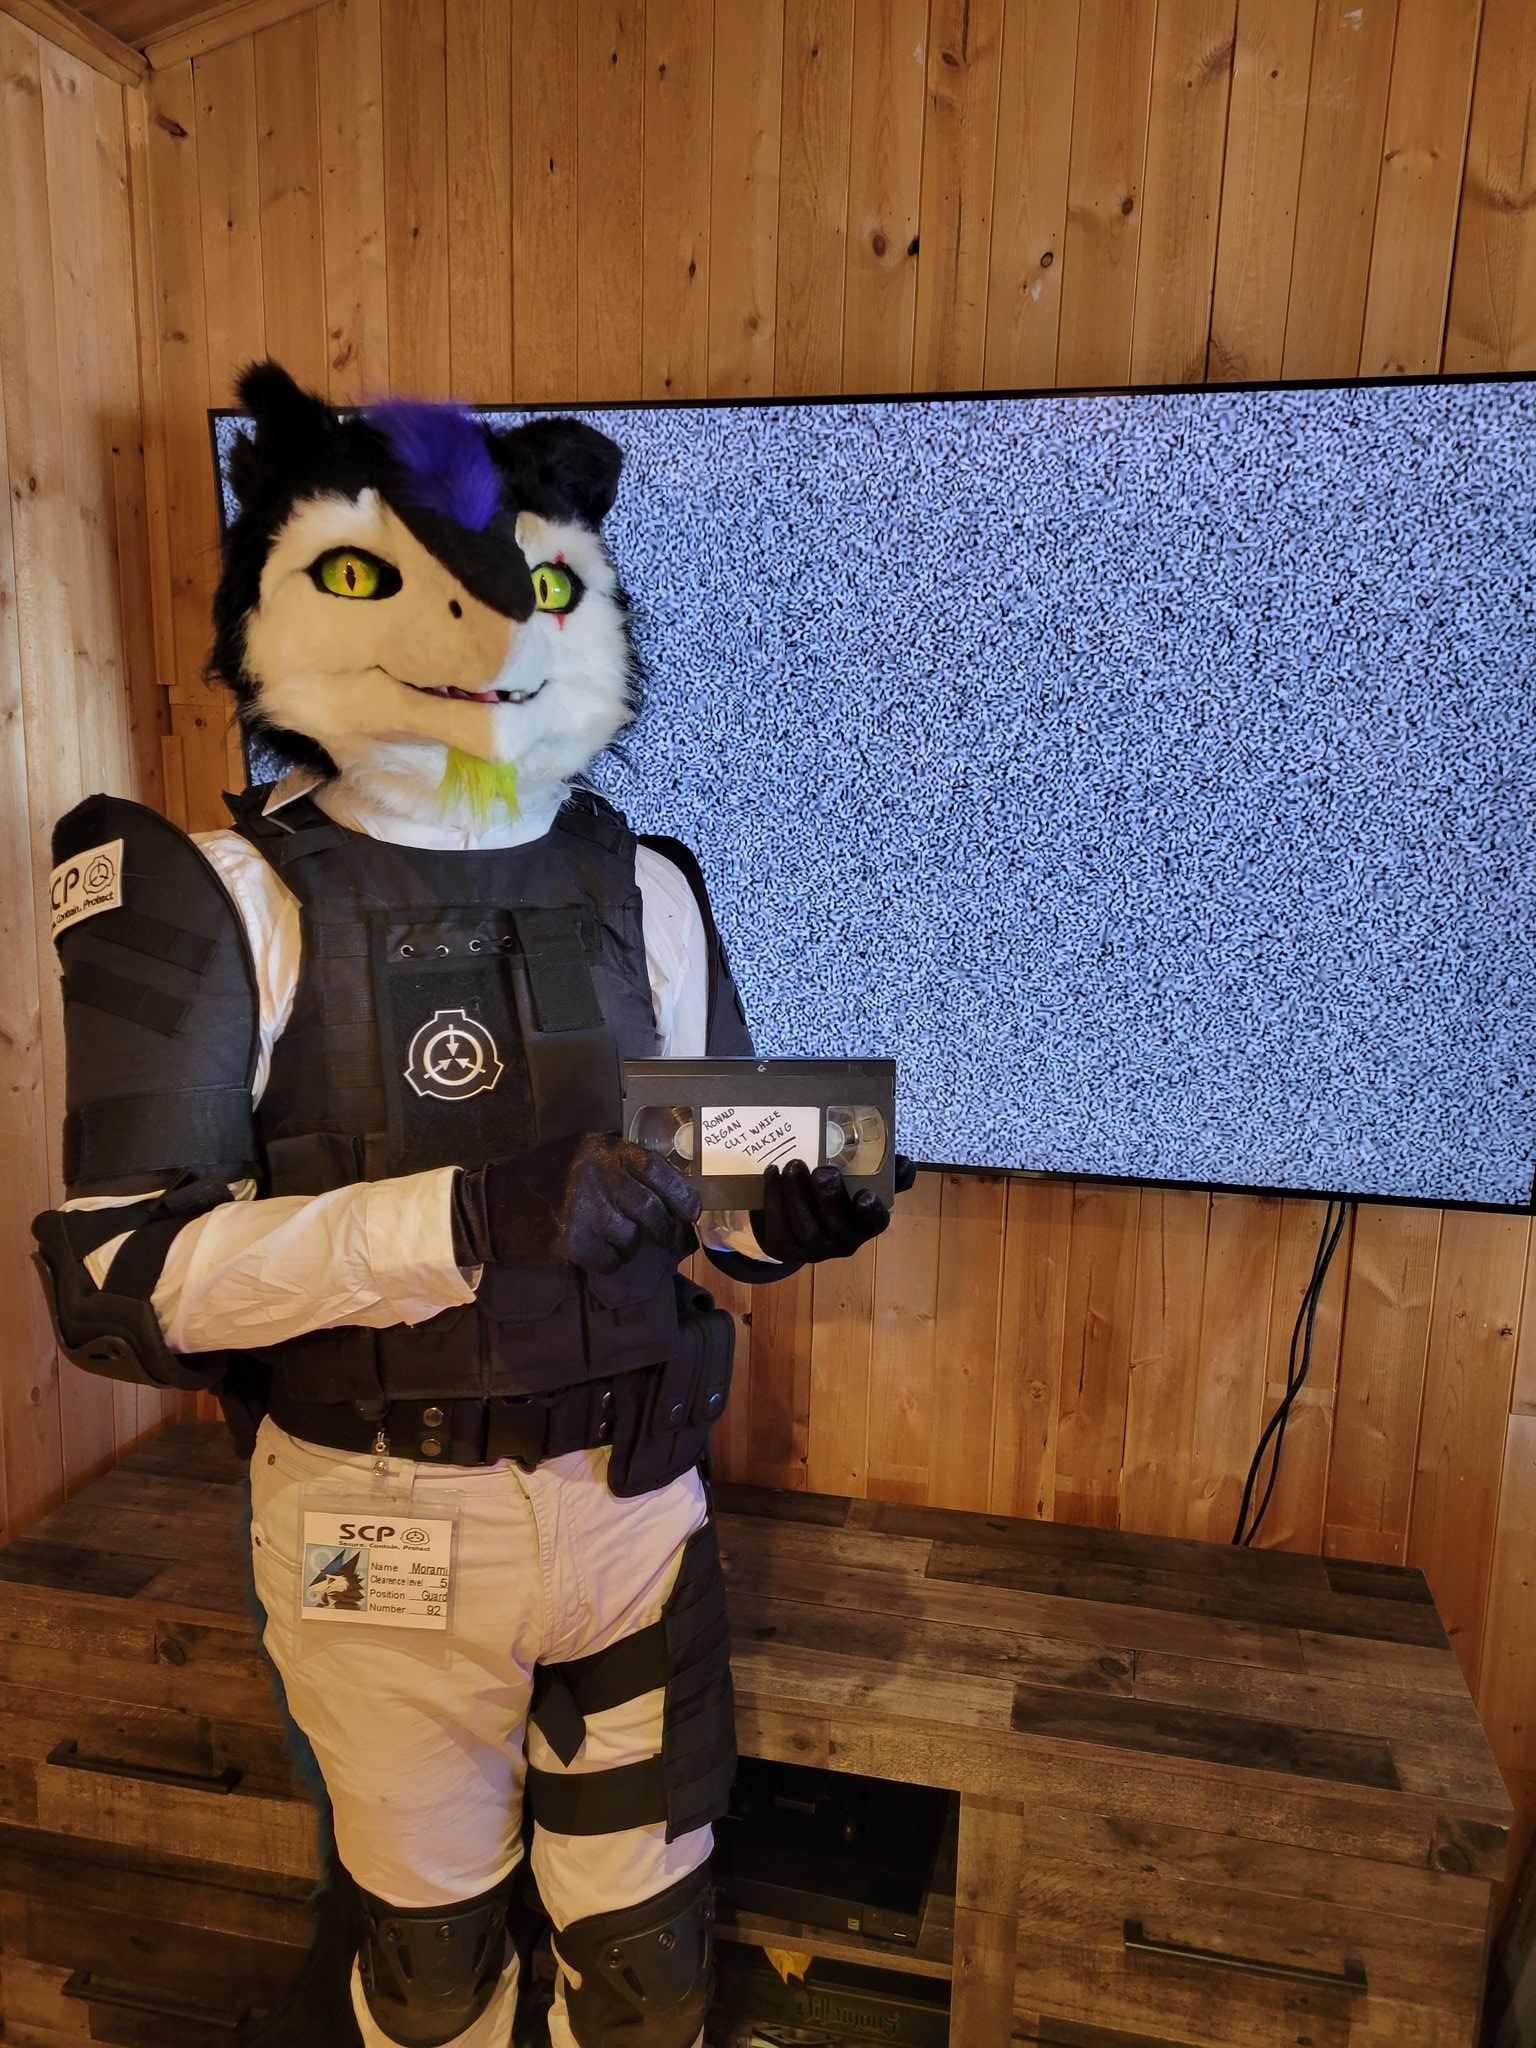 Morami The Sergal в X: „We seize SCP-1981! Now, we will watch and analyze it. #furry #fursuit #FursuitsFriday #cosplay #SCP #furryfandom #FurryFriday #fursuitfridays #FursuitFriday #furries #fursuiter #fursuiting #scpfoundation #costume #fursuits ...